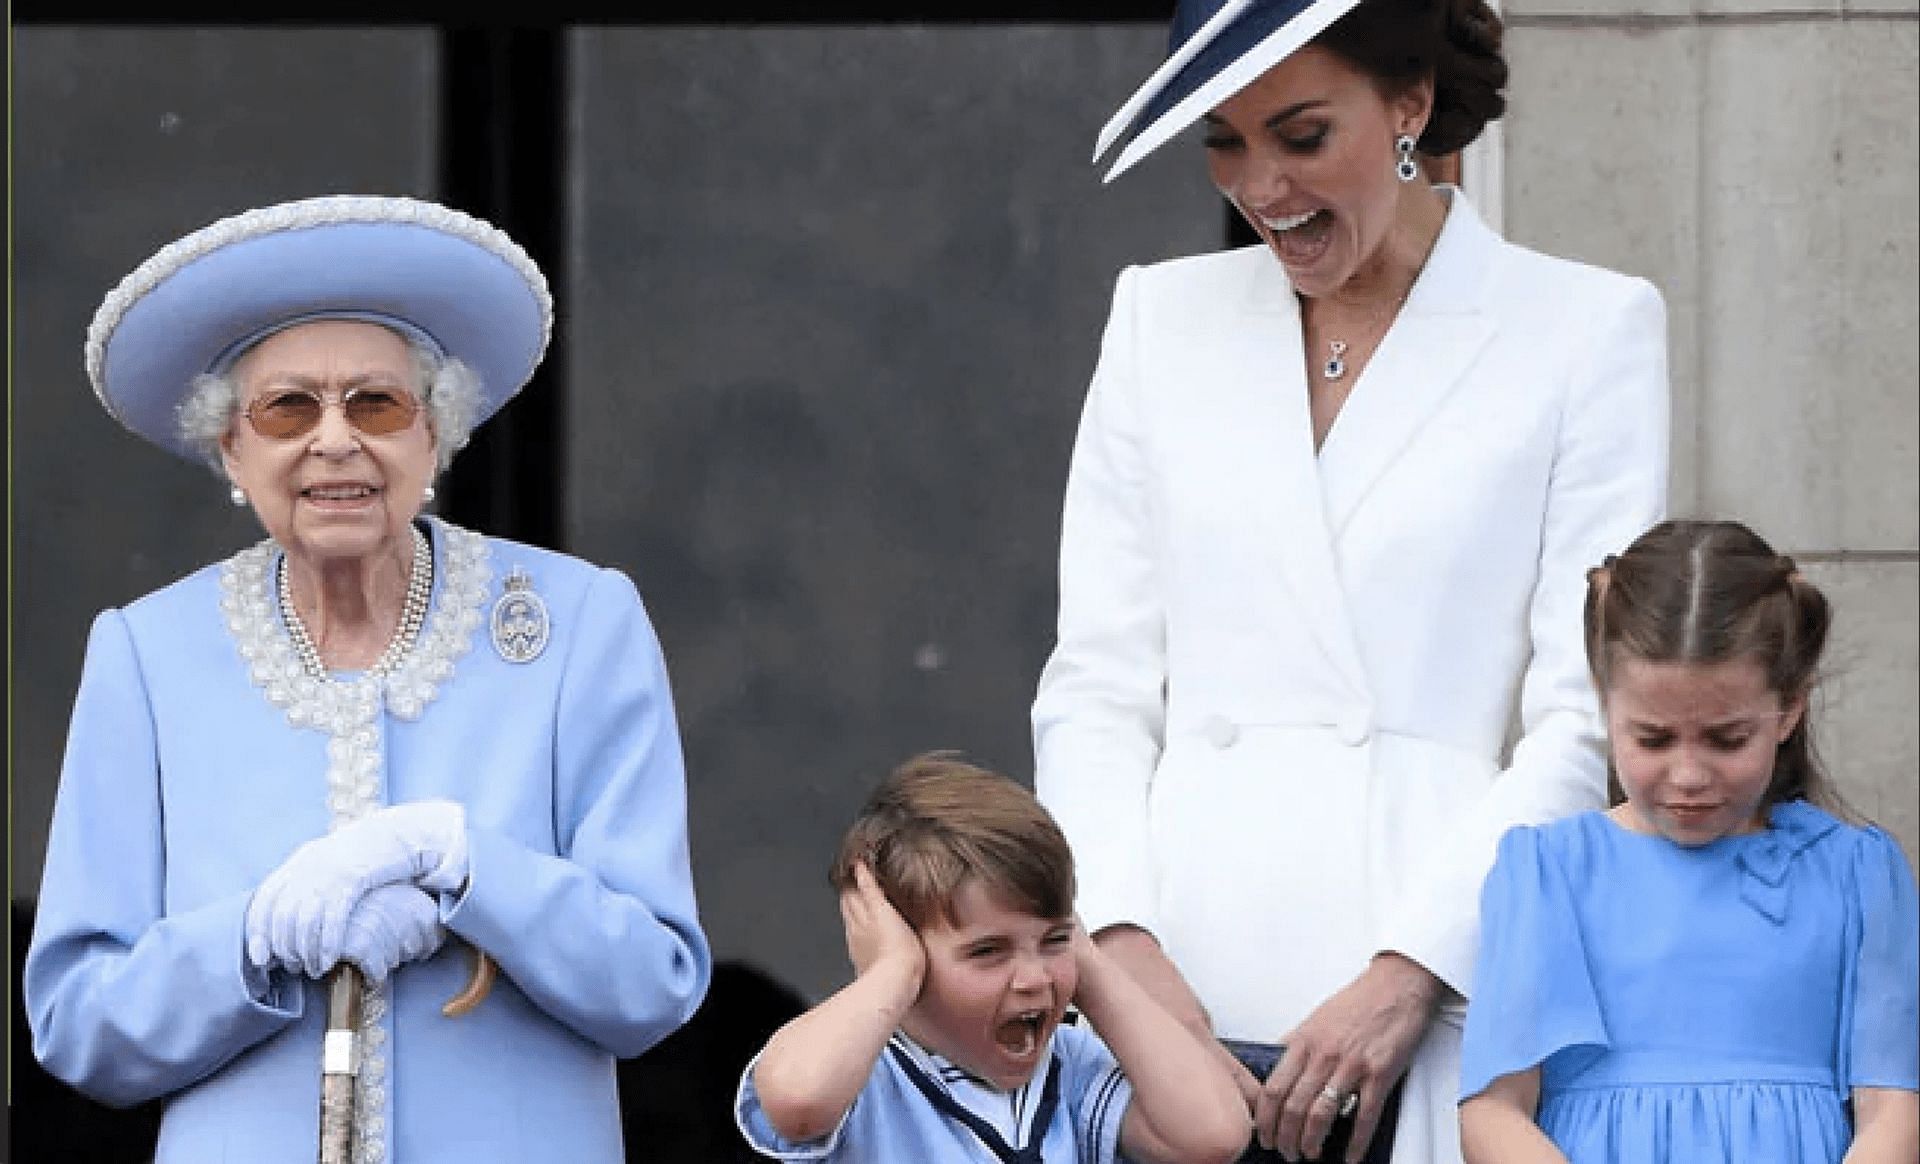 The Queen with the Royal Family on her platinum jubilee on June 2, 2022. (Image via AFP)